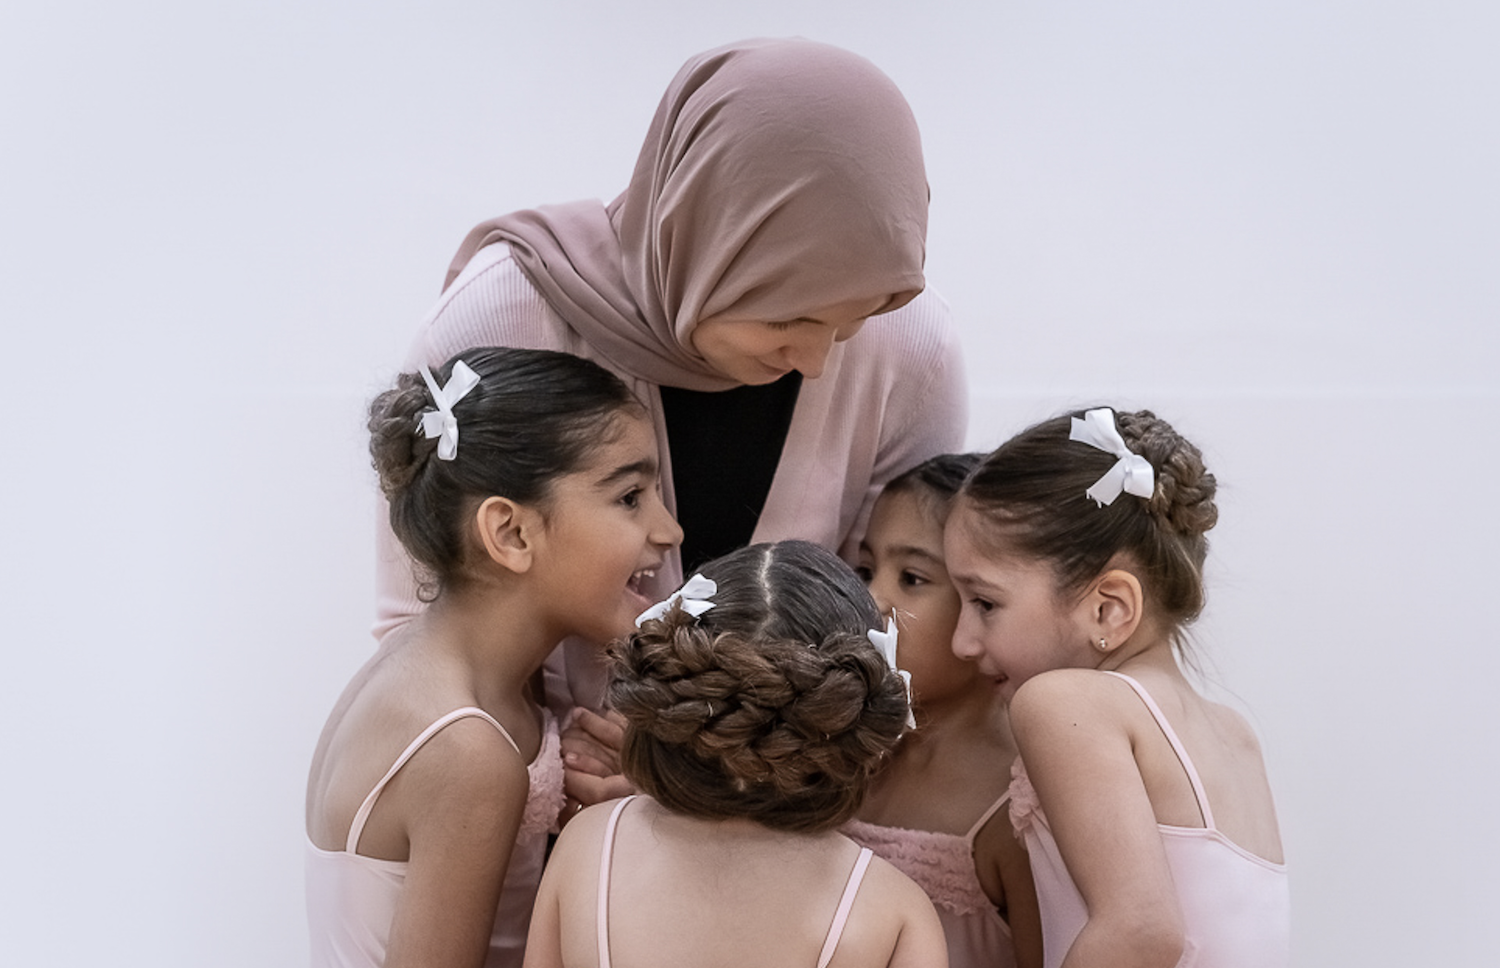 London ballet school looks to expand to Muslim countries including Saudi Arabia